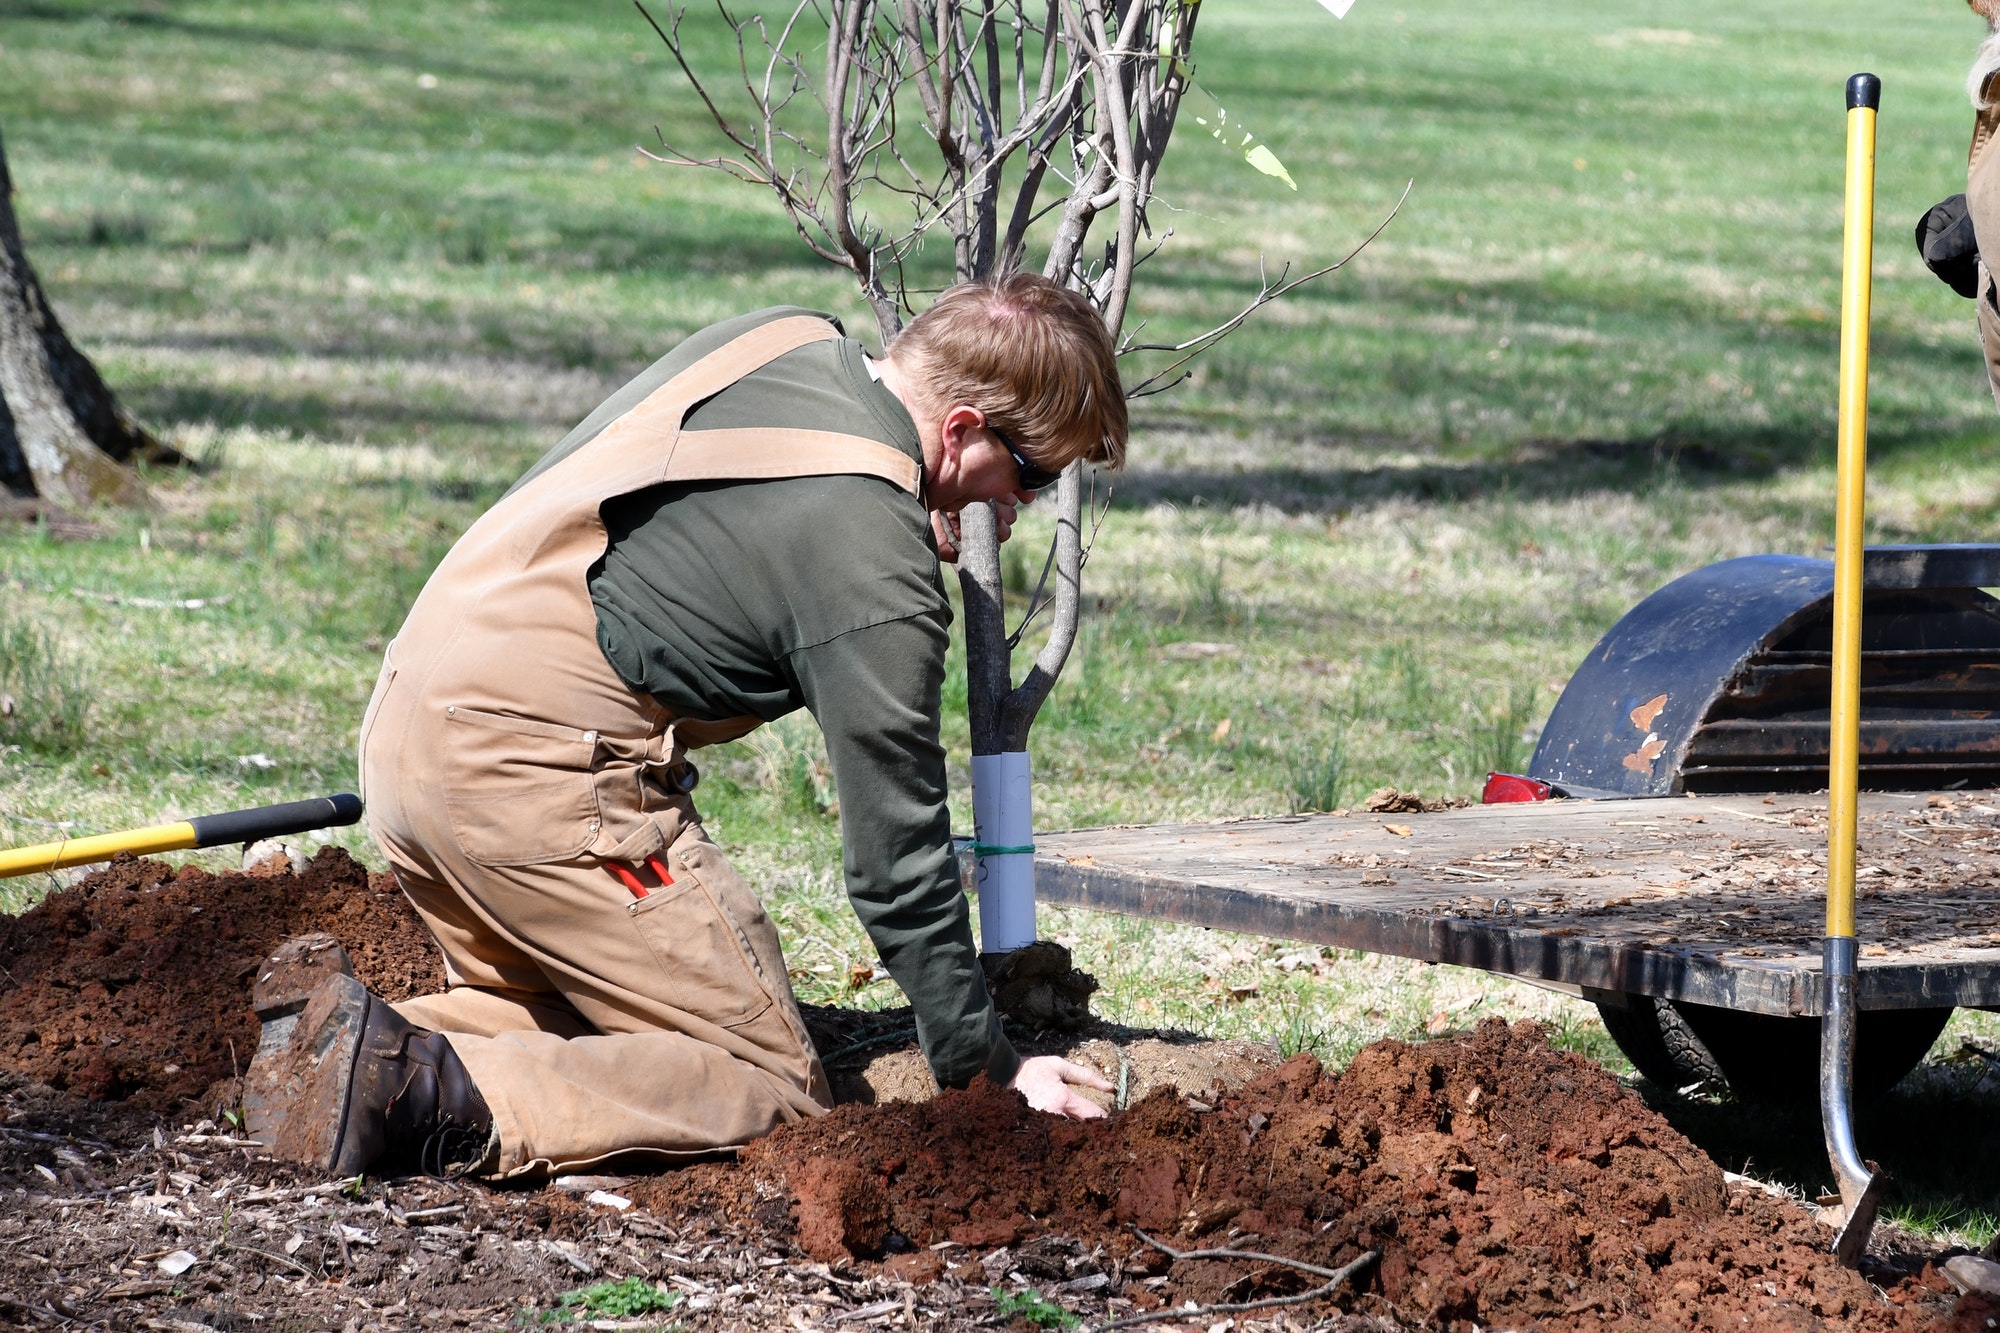 A man doing landscape work planting a tree at the park - landscaping, digging